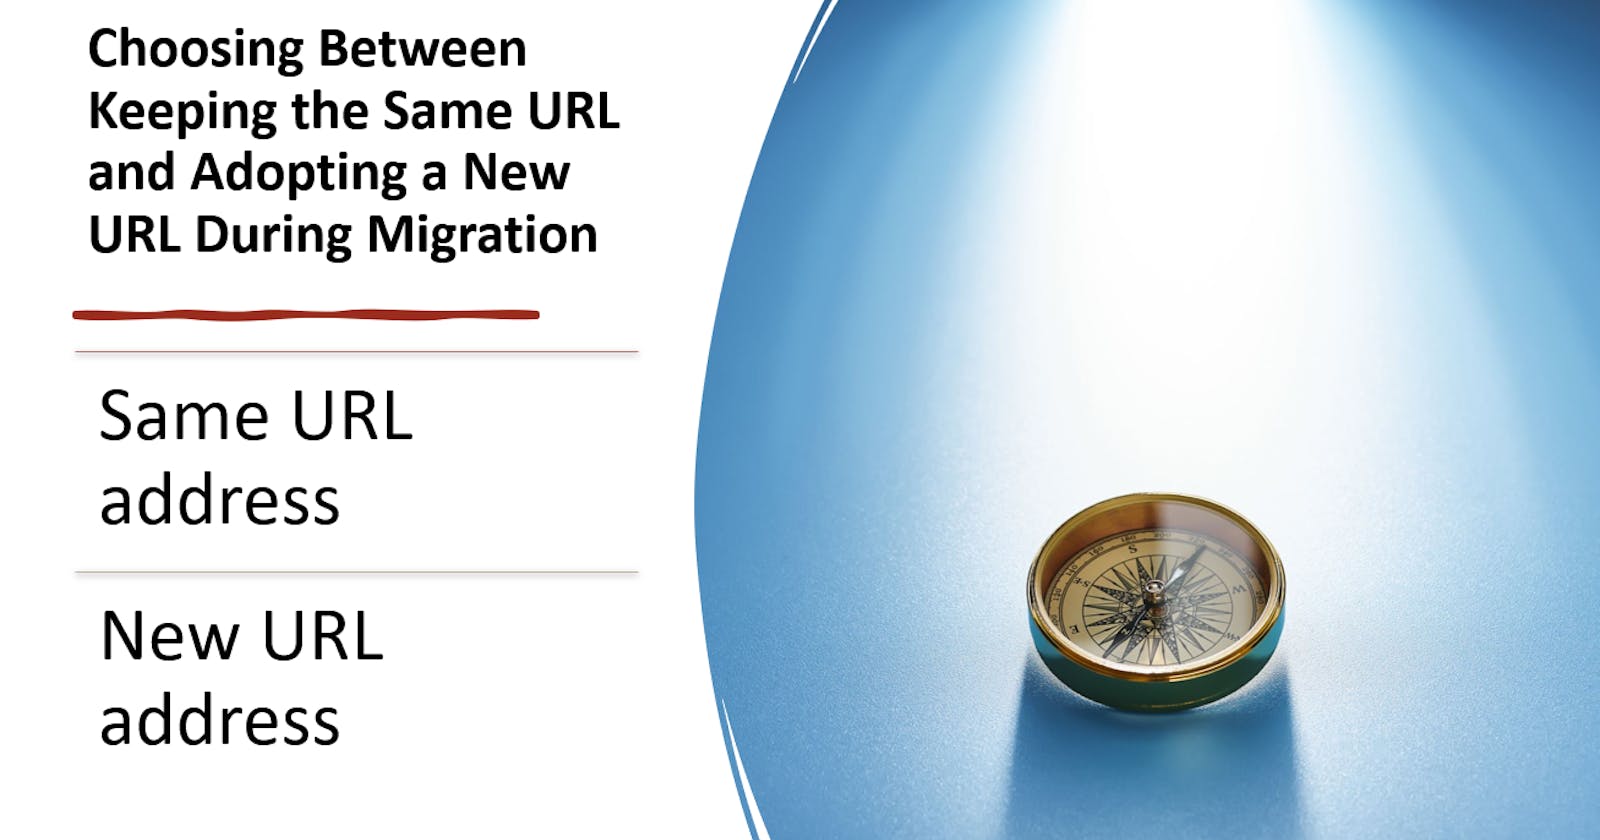 Choosing Between Keeping the Same URL and Adopting a New URL During Migration: A Strategic Decision